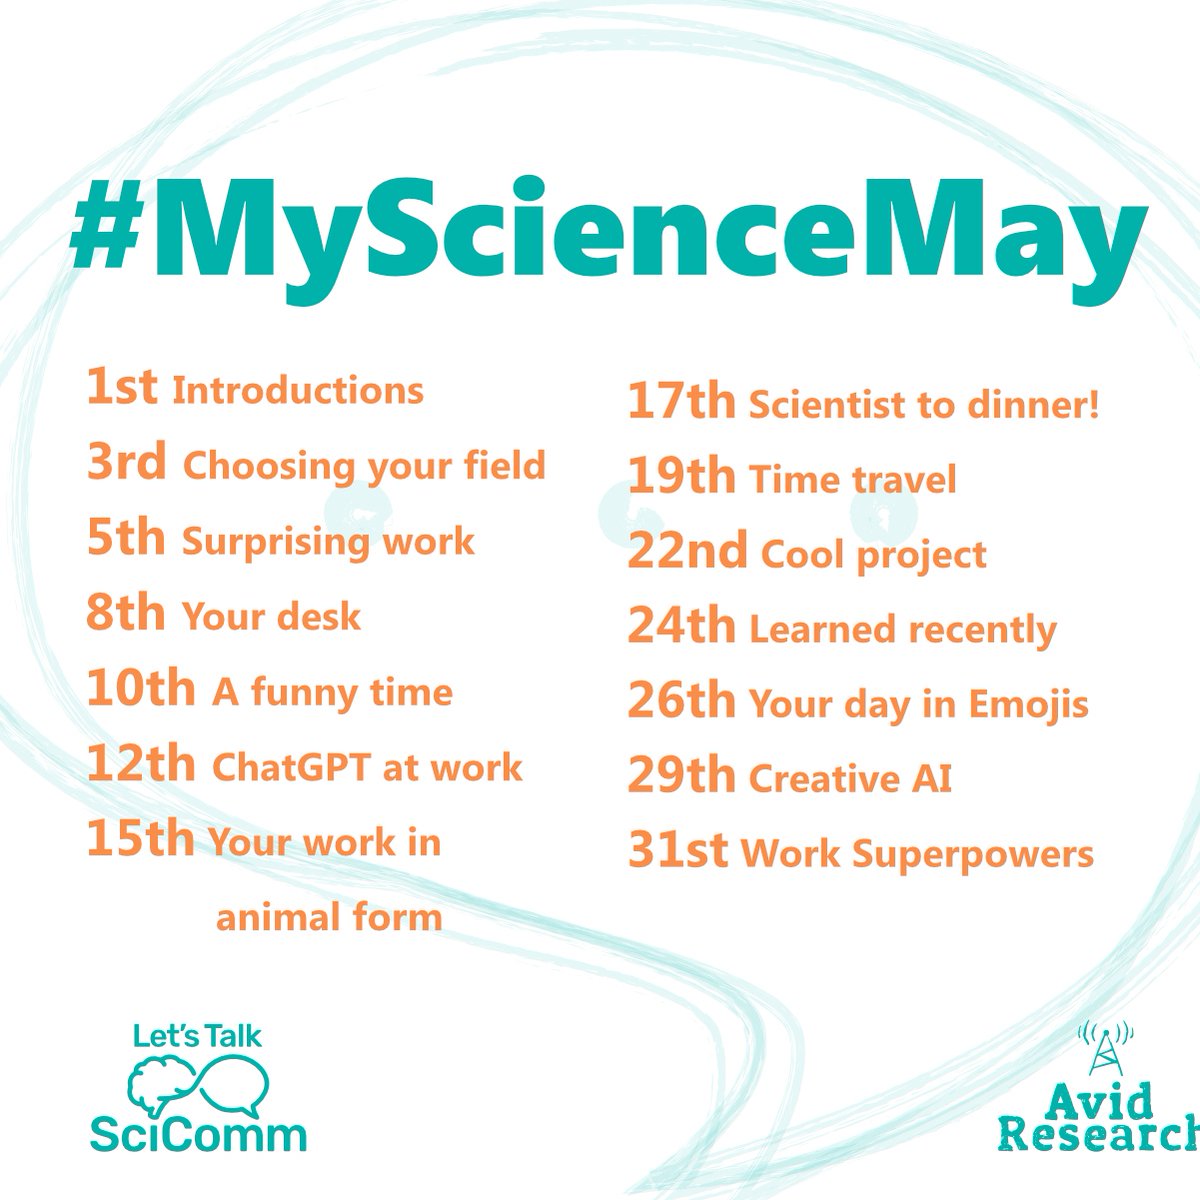 It's the second last week of #MyScienceMay and today is all about cool projects.. what is one of the coolest projects you've ever worked on? All the cool projects are welcome! (doesn't have to be science related)
@letsTalkSciComm